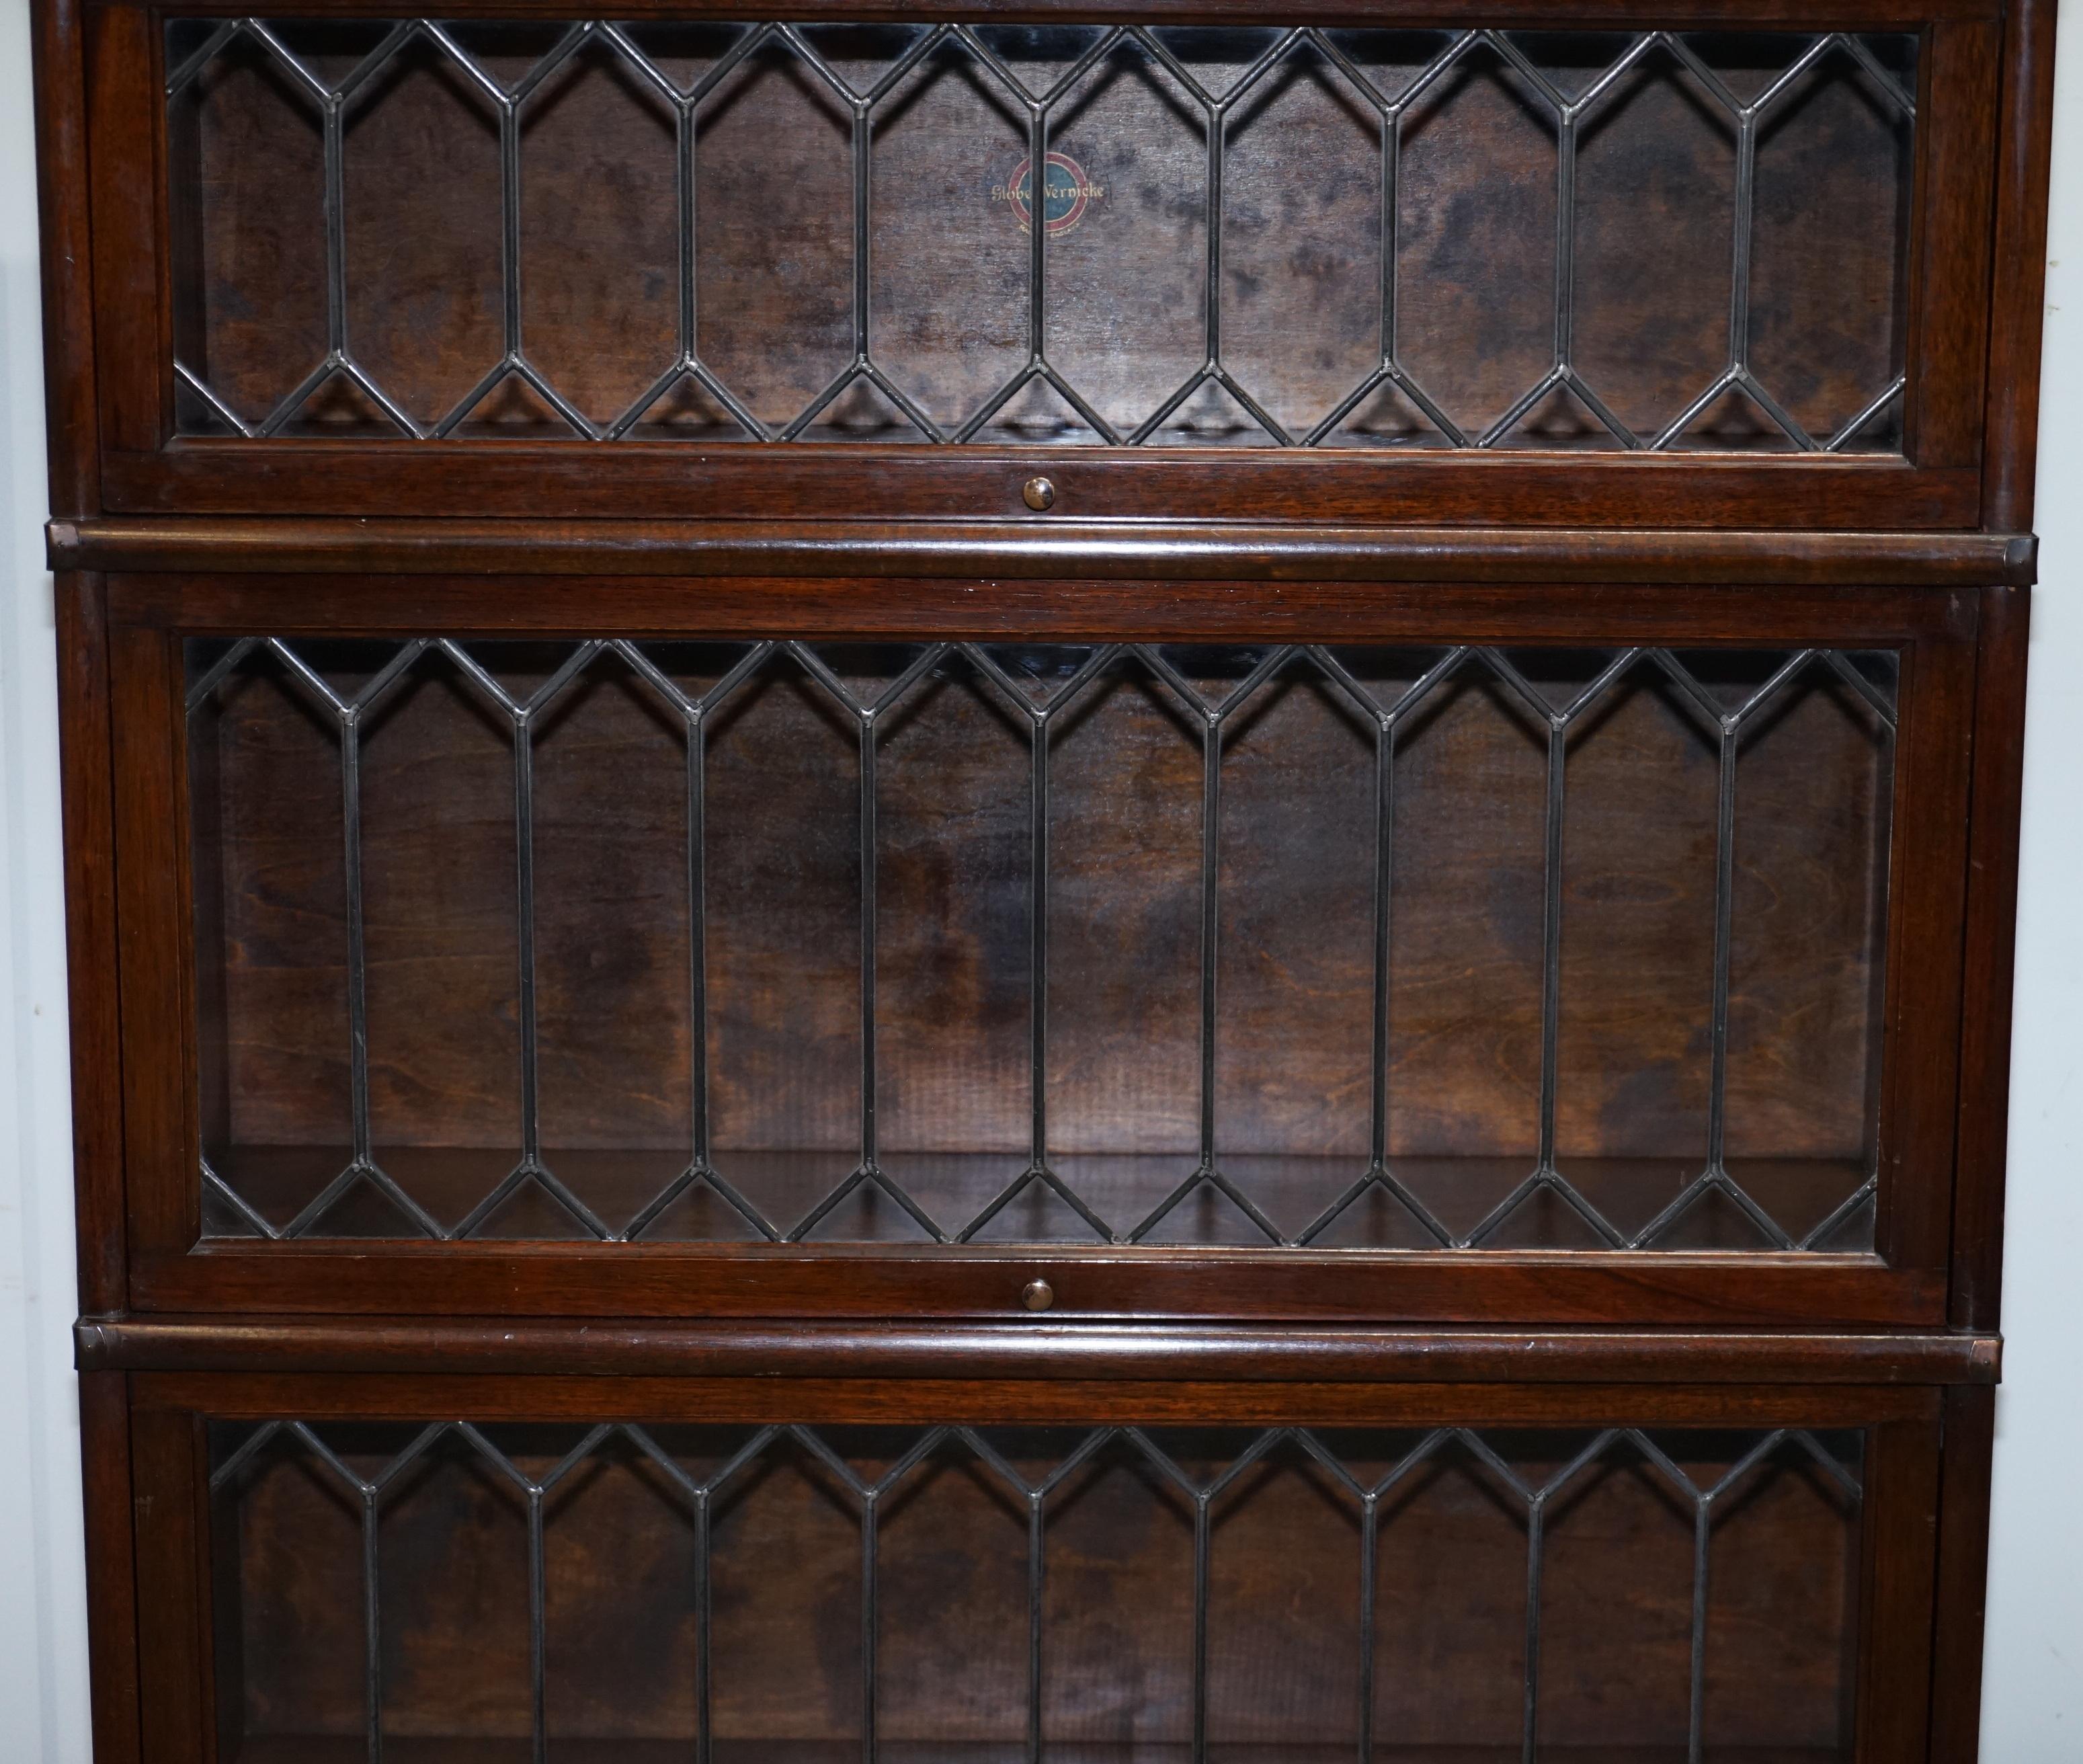 Hand-Crafted Rare Globe Wernicke Mahogany & Lead Lined Glass Legal Stacking Library Bookcase